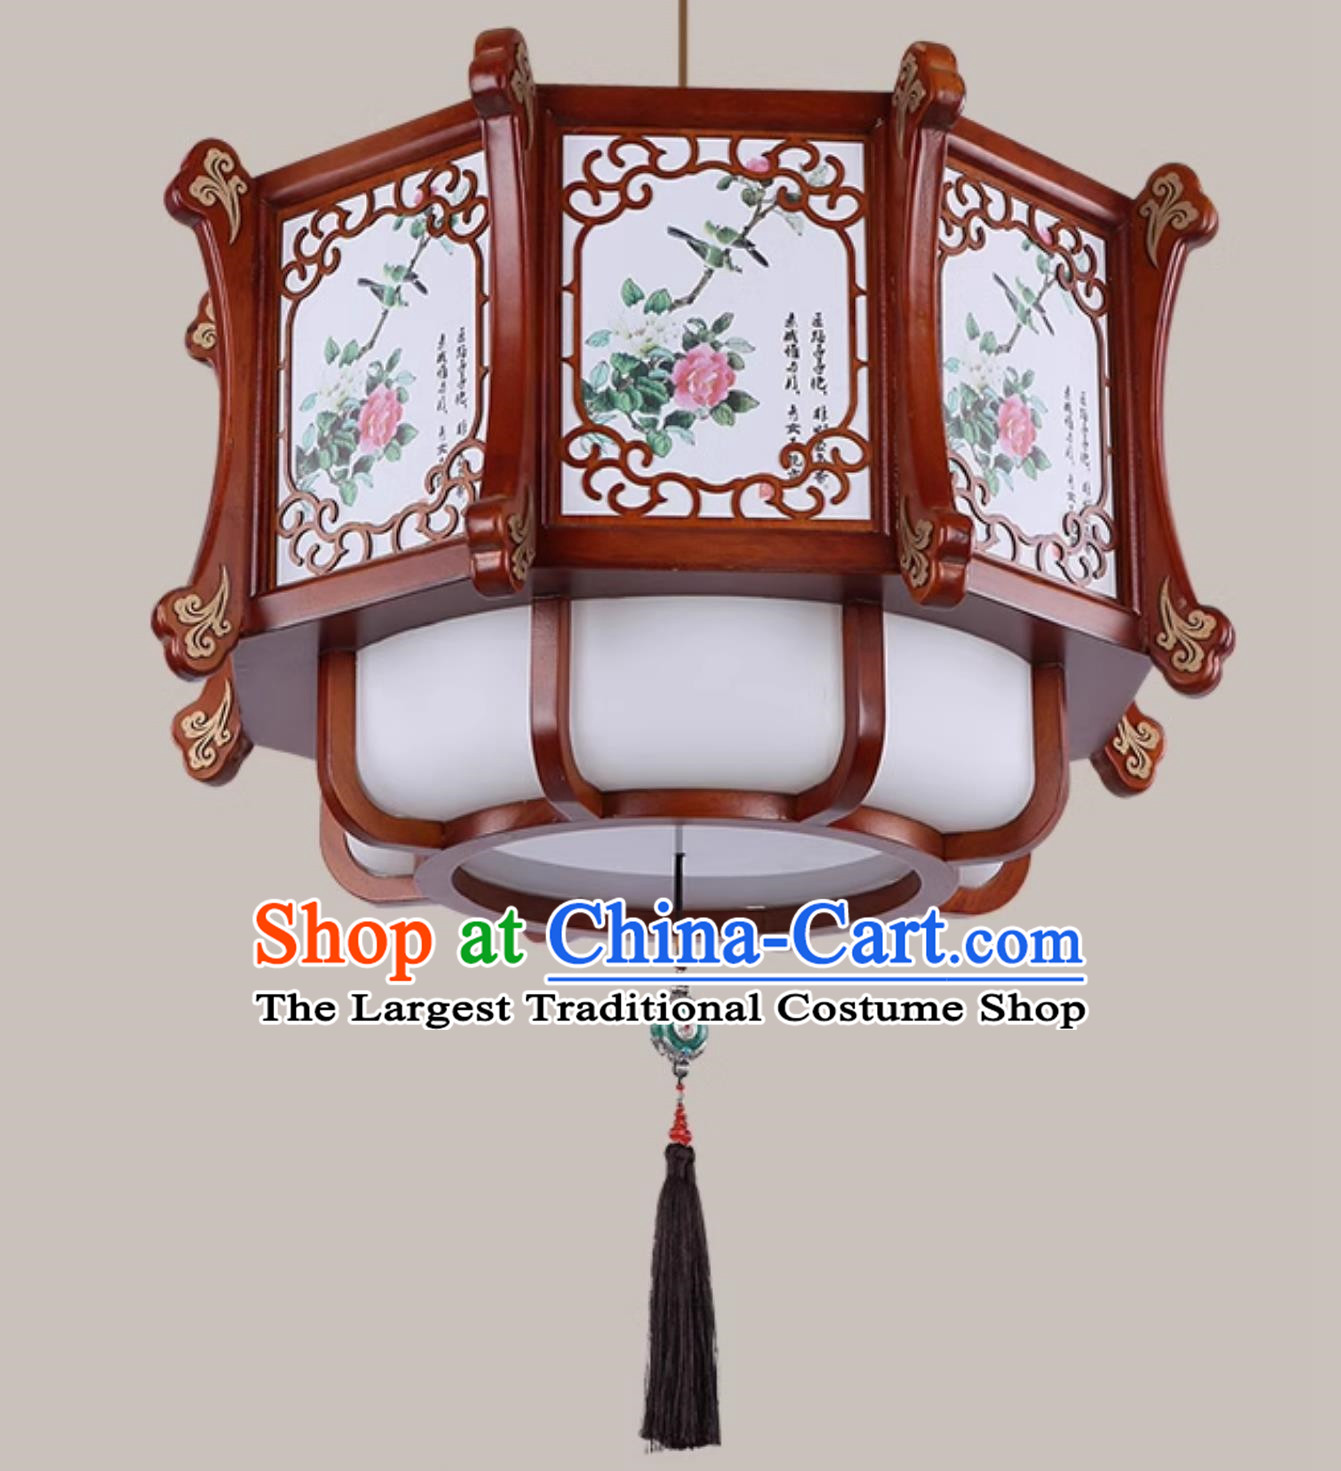 24 Inches High School Style Lantern Chandelier Solid Wood Teahouse Hot Pot Restaurant Ancient Building Restaurant Lamp Classical Palace Lamp Chinese Style